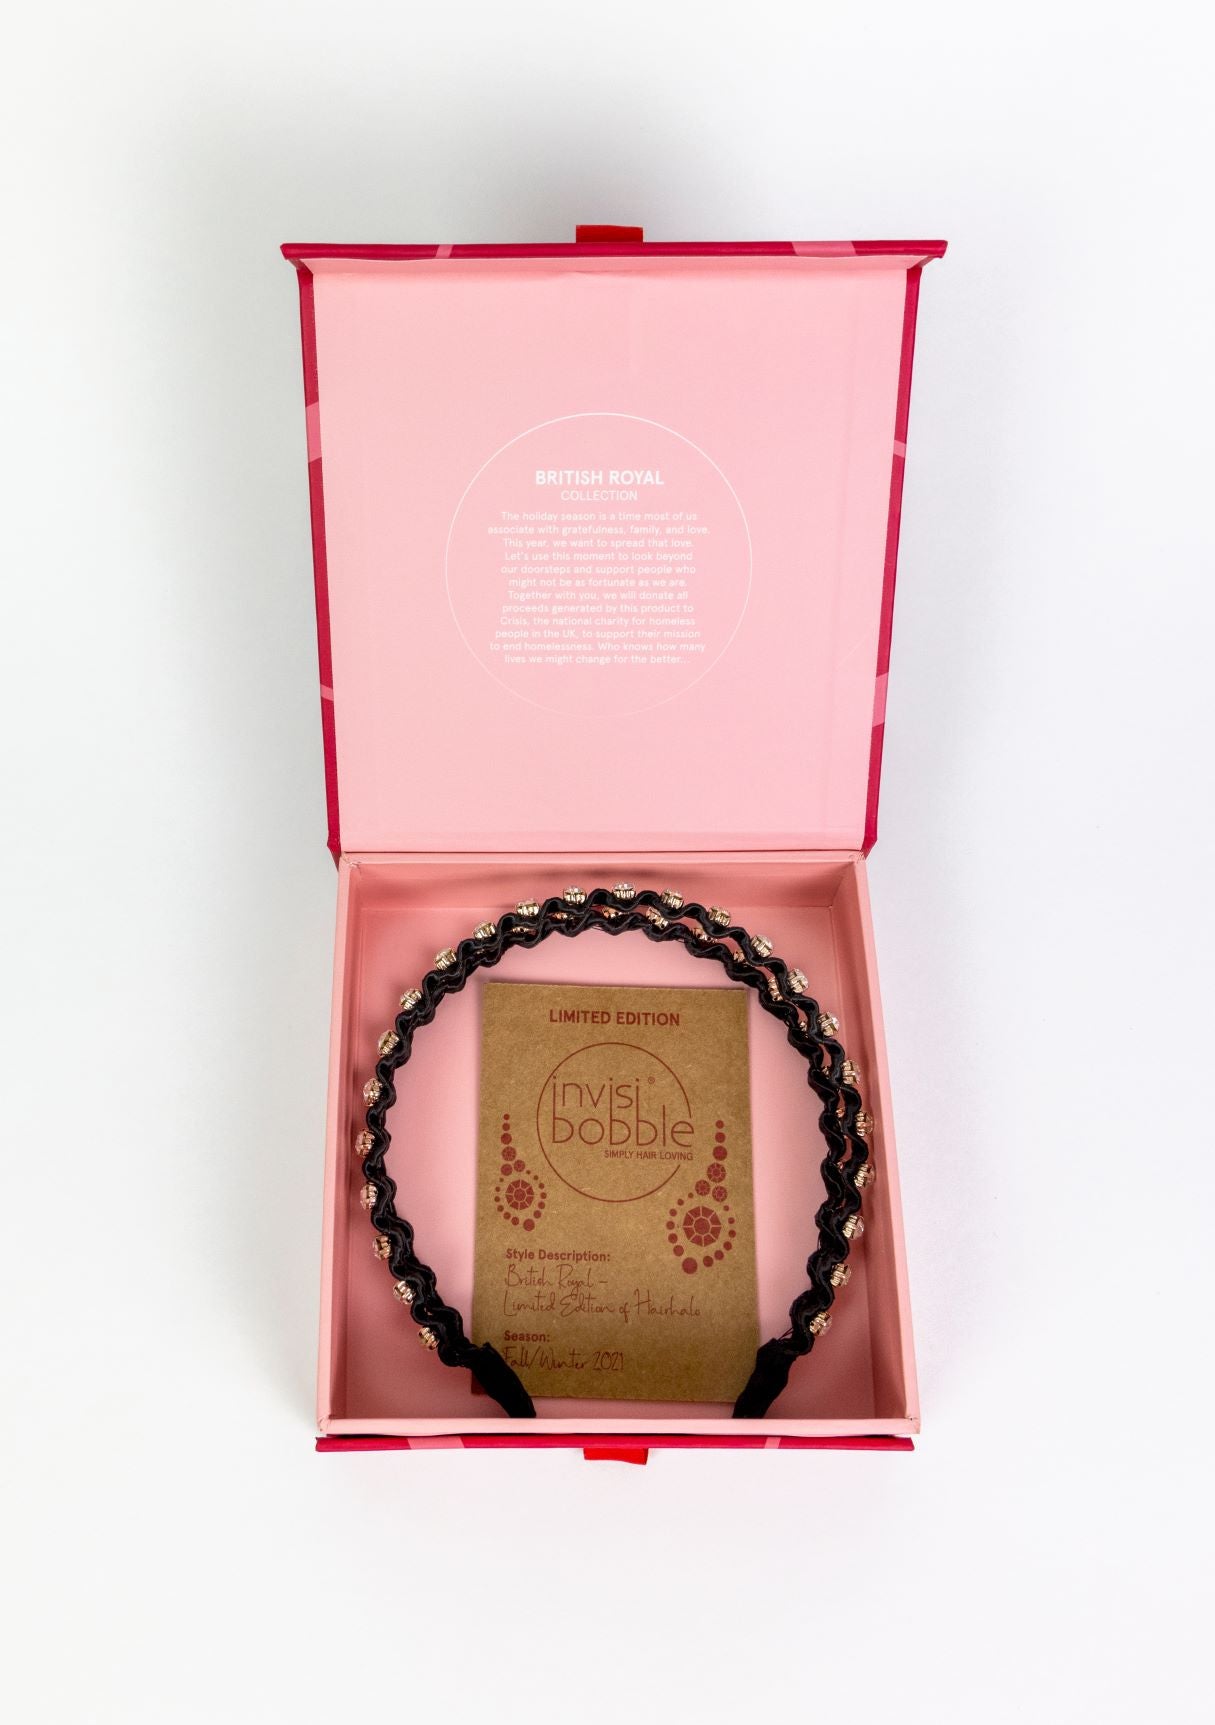 HAIRHALO British Royal Charity Box - Online Exclusive